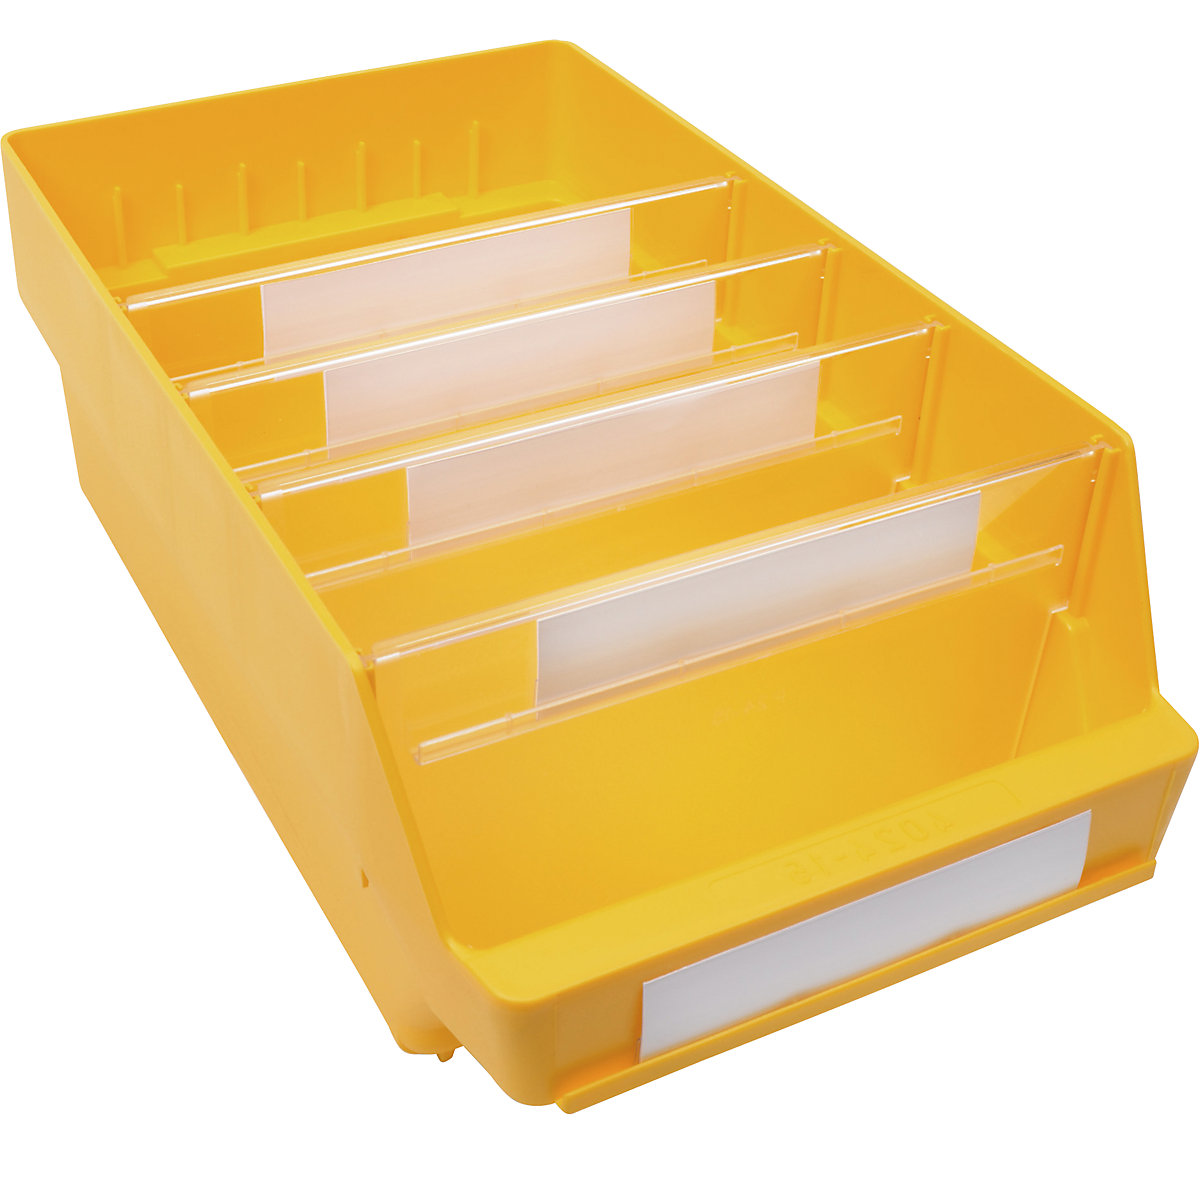 Shelf bin made of highly impact resistant polypropylene – STEMO, yellow, LxWxH 400 x 240 x 150 mm, pack of 10-7